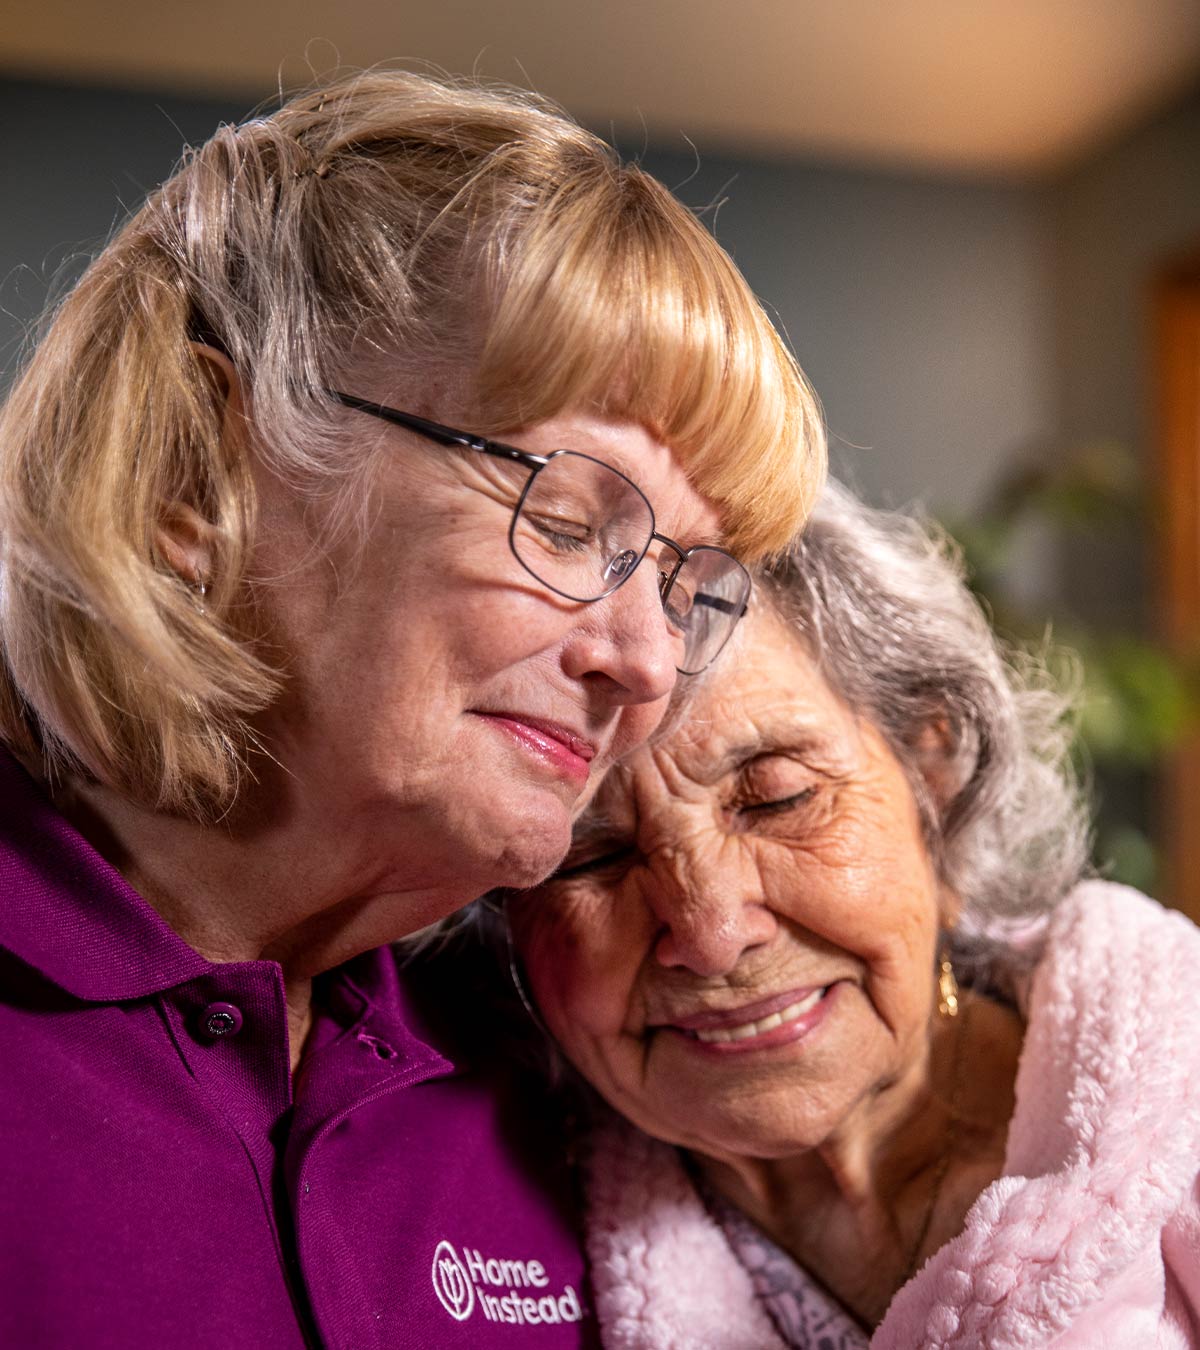 CAREGiver providing in-home senior care services. Home Instead of Tecumseh, ON provides Elder Care to aging adults. 